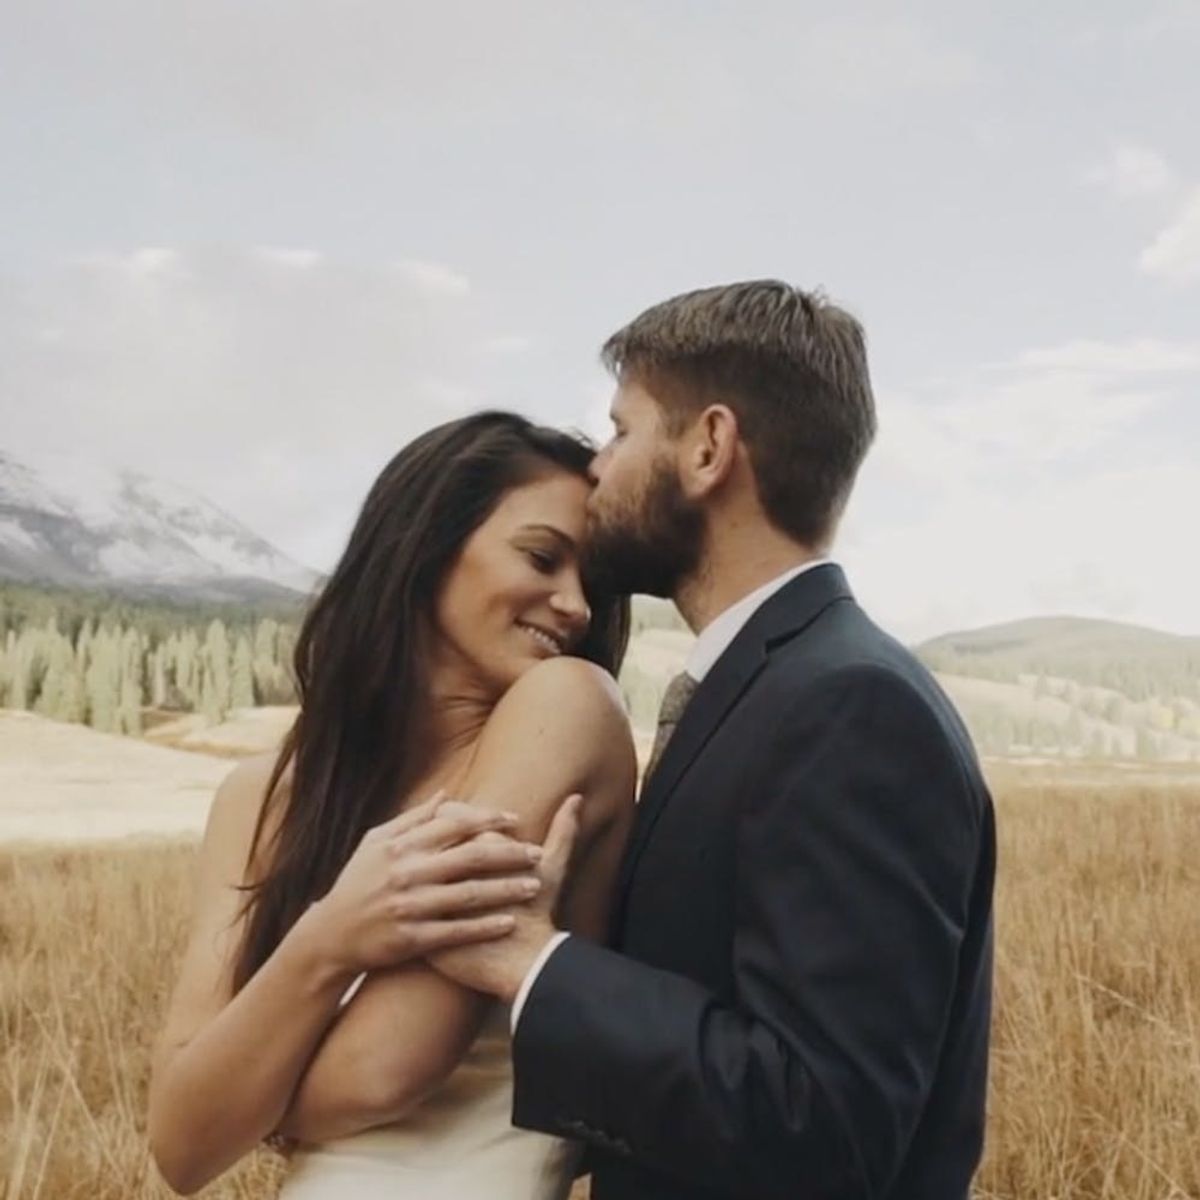 This Colorado Rockies Elopement Might Be the Most Romantic Wedding Video Ever